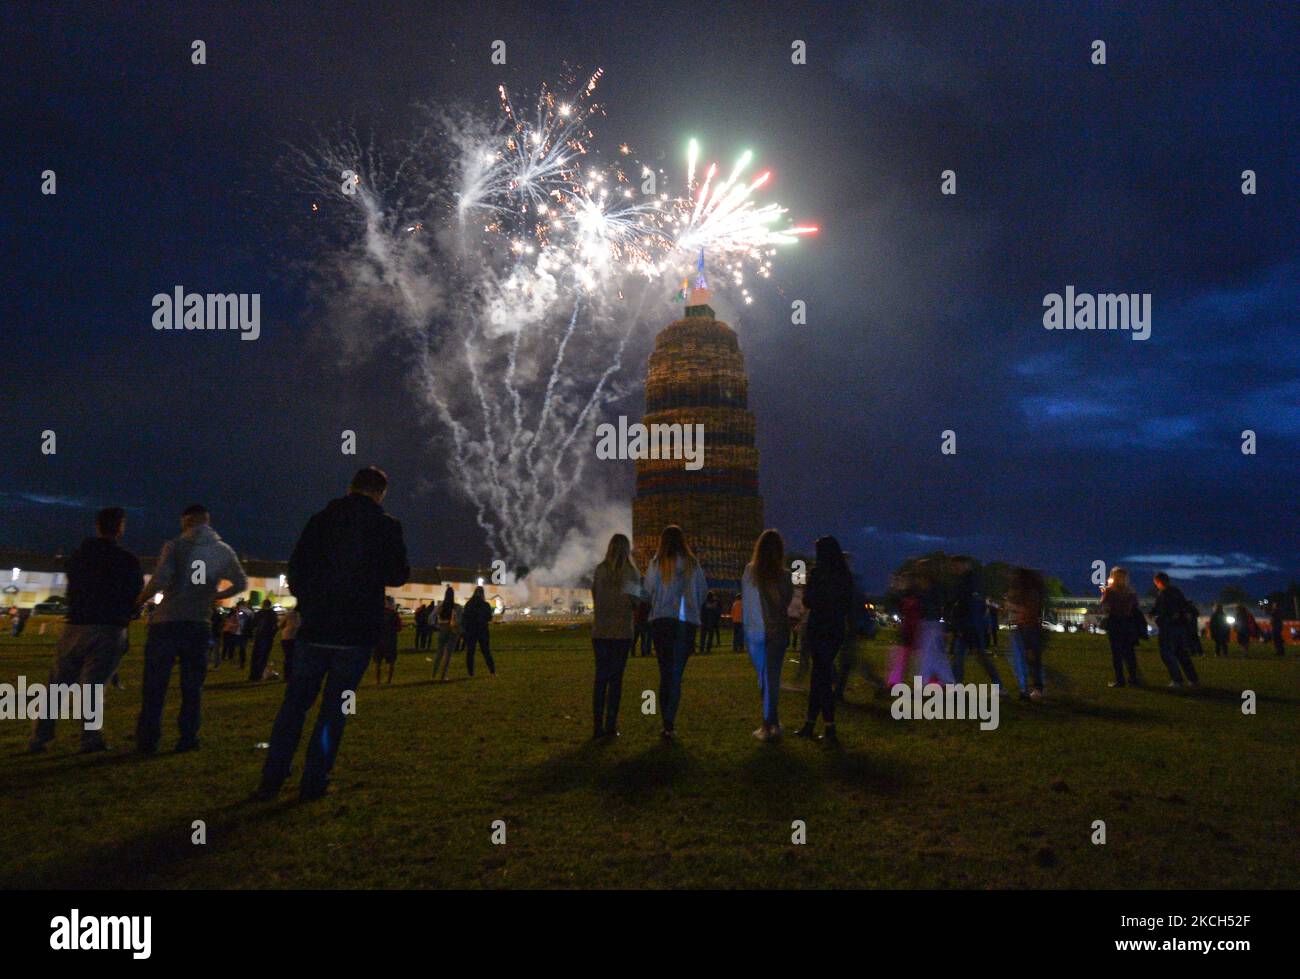 People watch fireworks as they wait for a large bonfire to be lit during the Eleventh Night celebration organized by members of the Loyalist Order in Craigy Hill, Larne. Tonight, large bonfires are lit in many Protestant loyalist neighbourhoods of Northern Ireland. Bonfires were originally lit to celebrate the Glorious Revolution (1688) and victory of Protestant king William of Orange over Catholic king James II at the Battle of the Boyne (1690), which began the Protestant Ascendancy in Ireland. On Monday, 12 July 2021, in Larne, County Antrim, Northern Ireland (Photo by Artur Widak/NurPhoto) Stock Photo